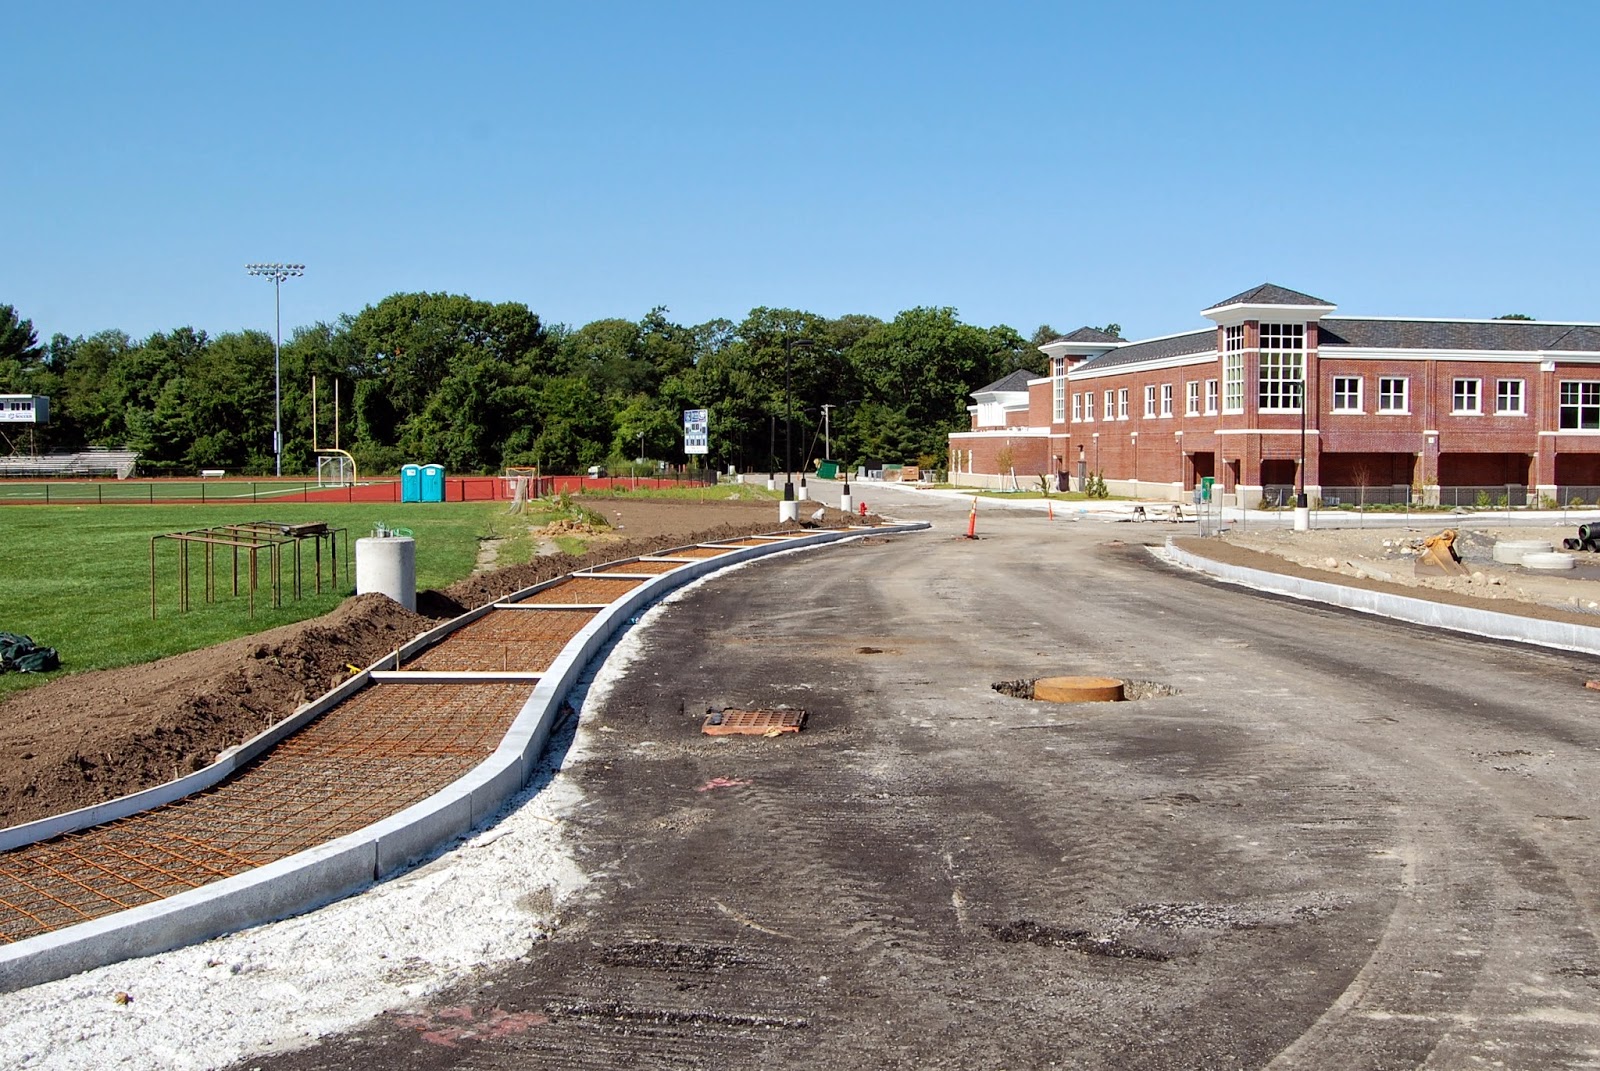 sidewalks and entrance to cafeteria and service area